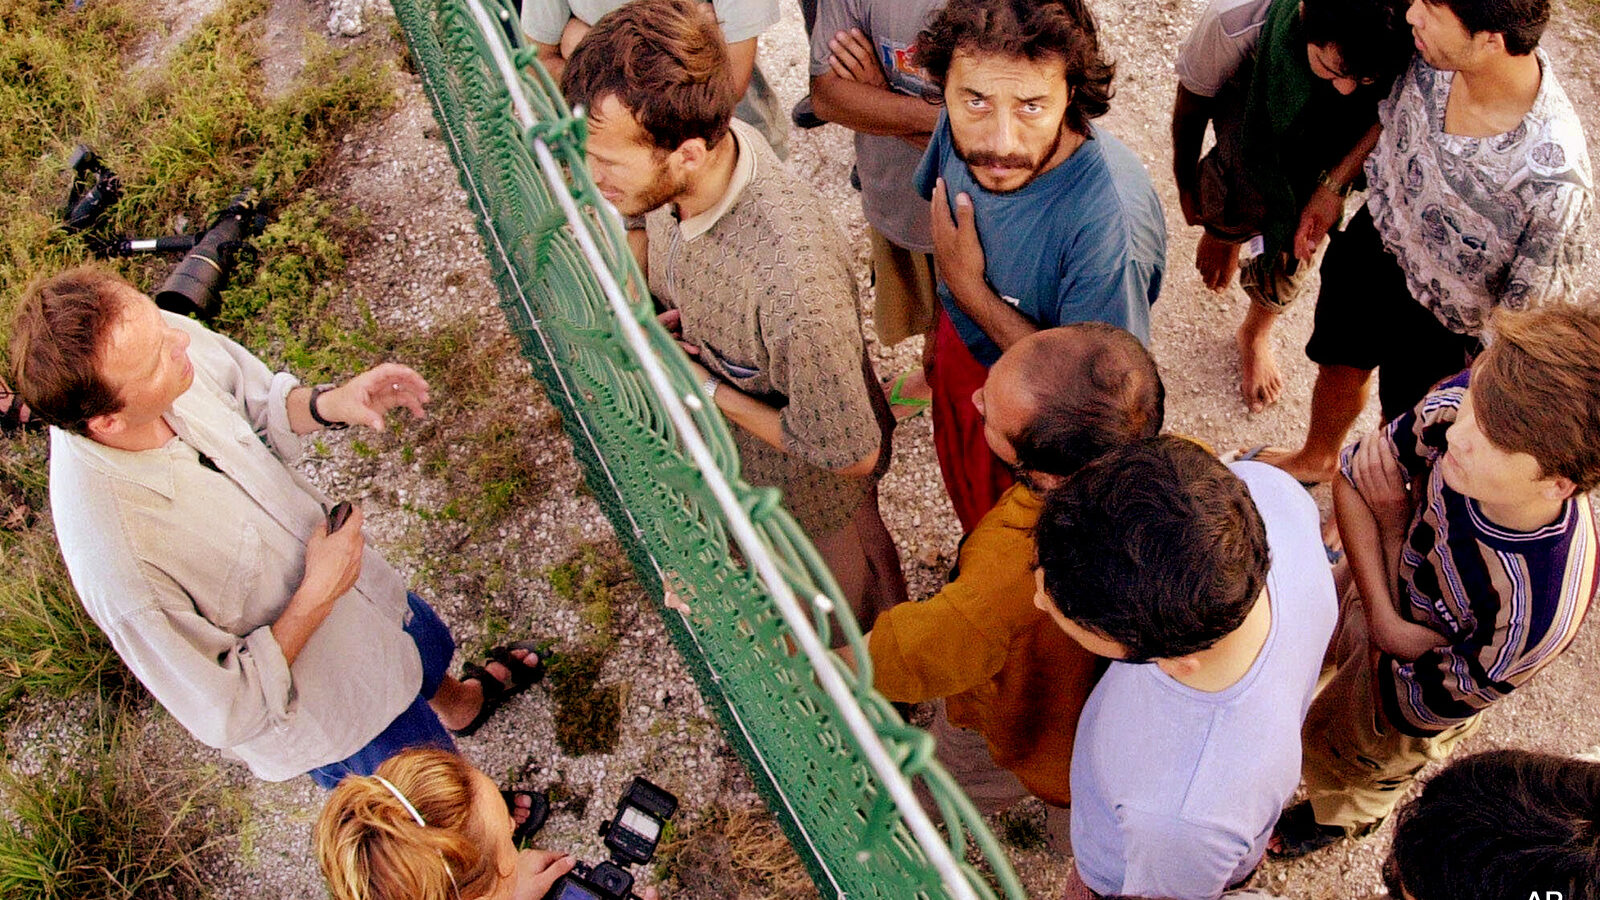 In this Sept. 19, 2001, file photo, refugees, right, gather on one side of a fence to talk with international journalists about their journey that brought them to the Island of Nauru. Human rights groups accused Australia on Wednesday, Aug. 3, 2016, of deliberately ignoring the abuse of asylum seekers being held at the remote Pacific island detention camp in a bid to deter future refugees from trying to reach the country by boat.